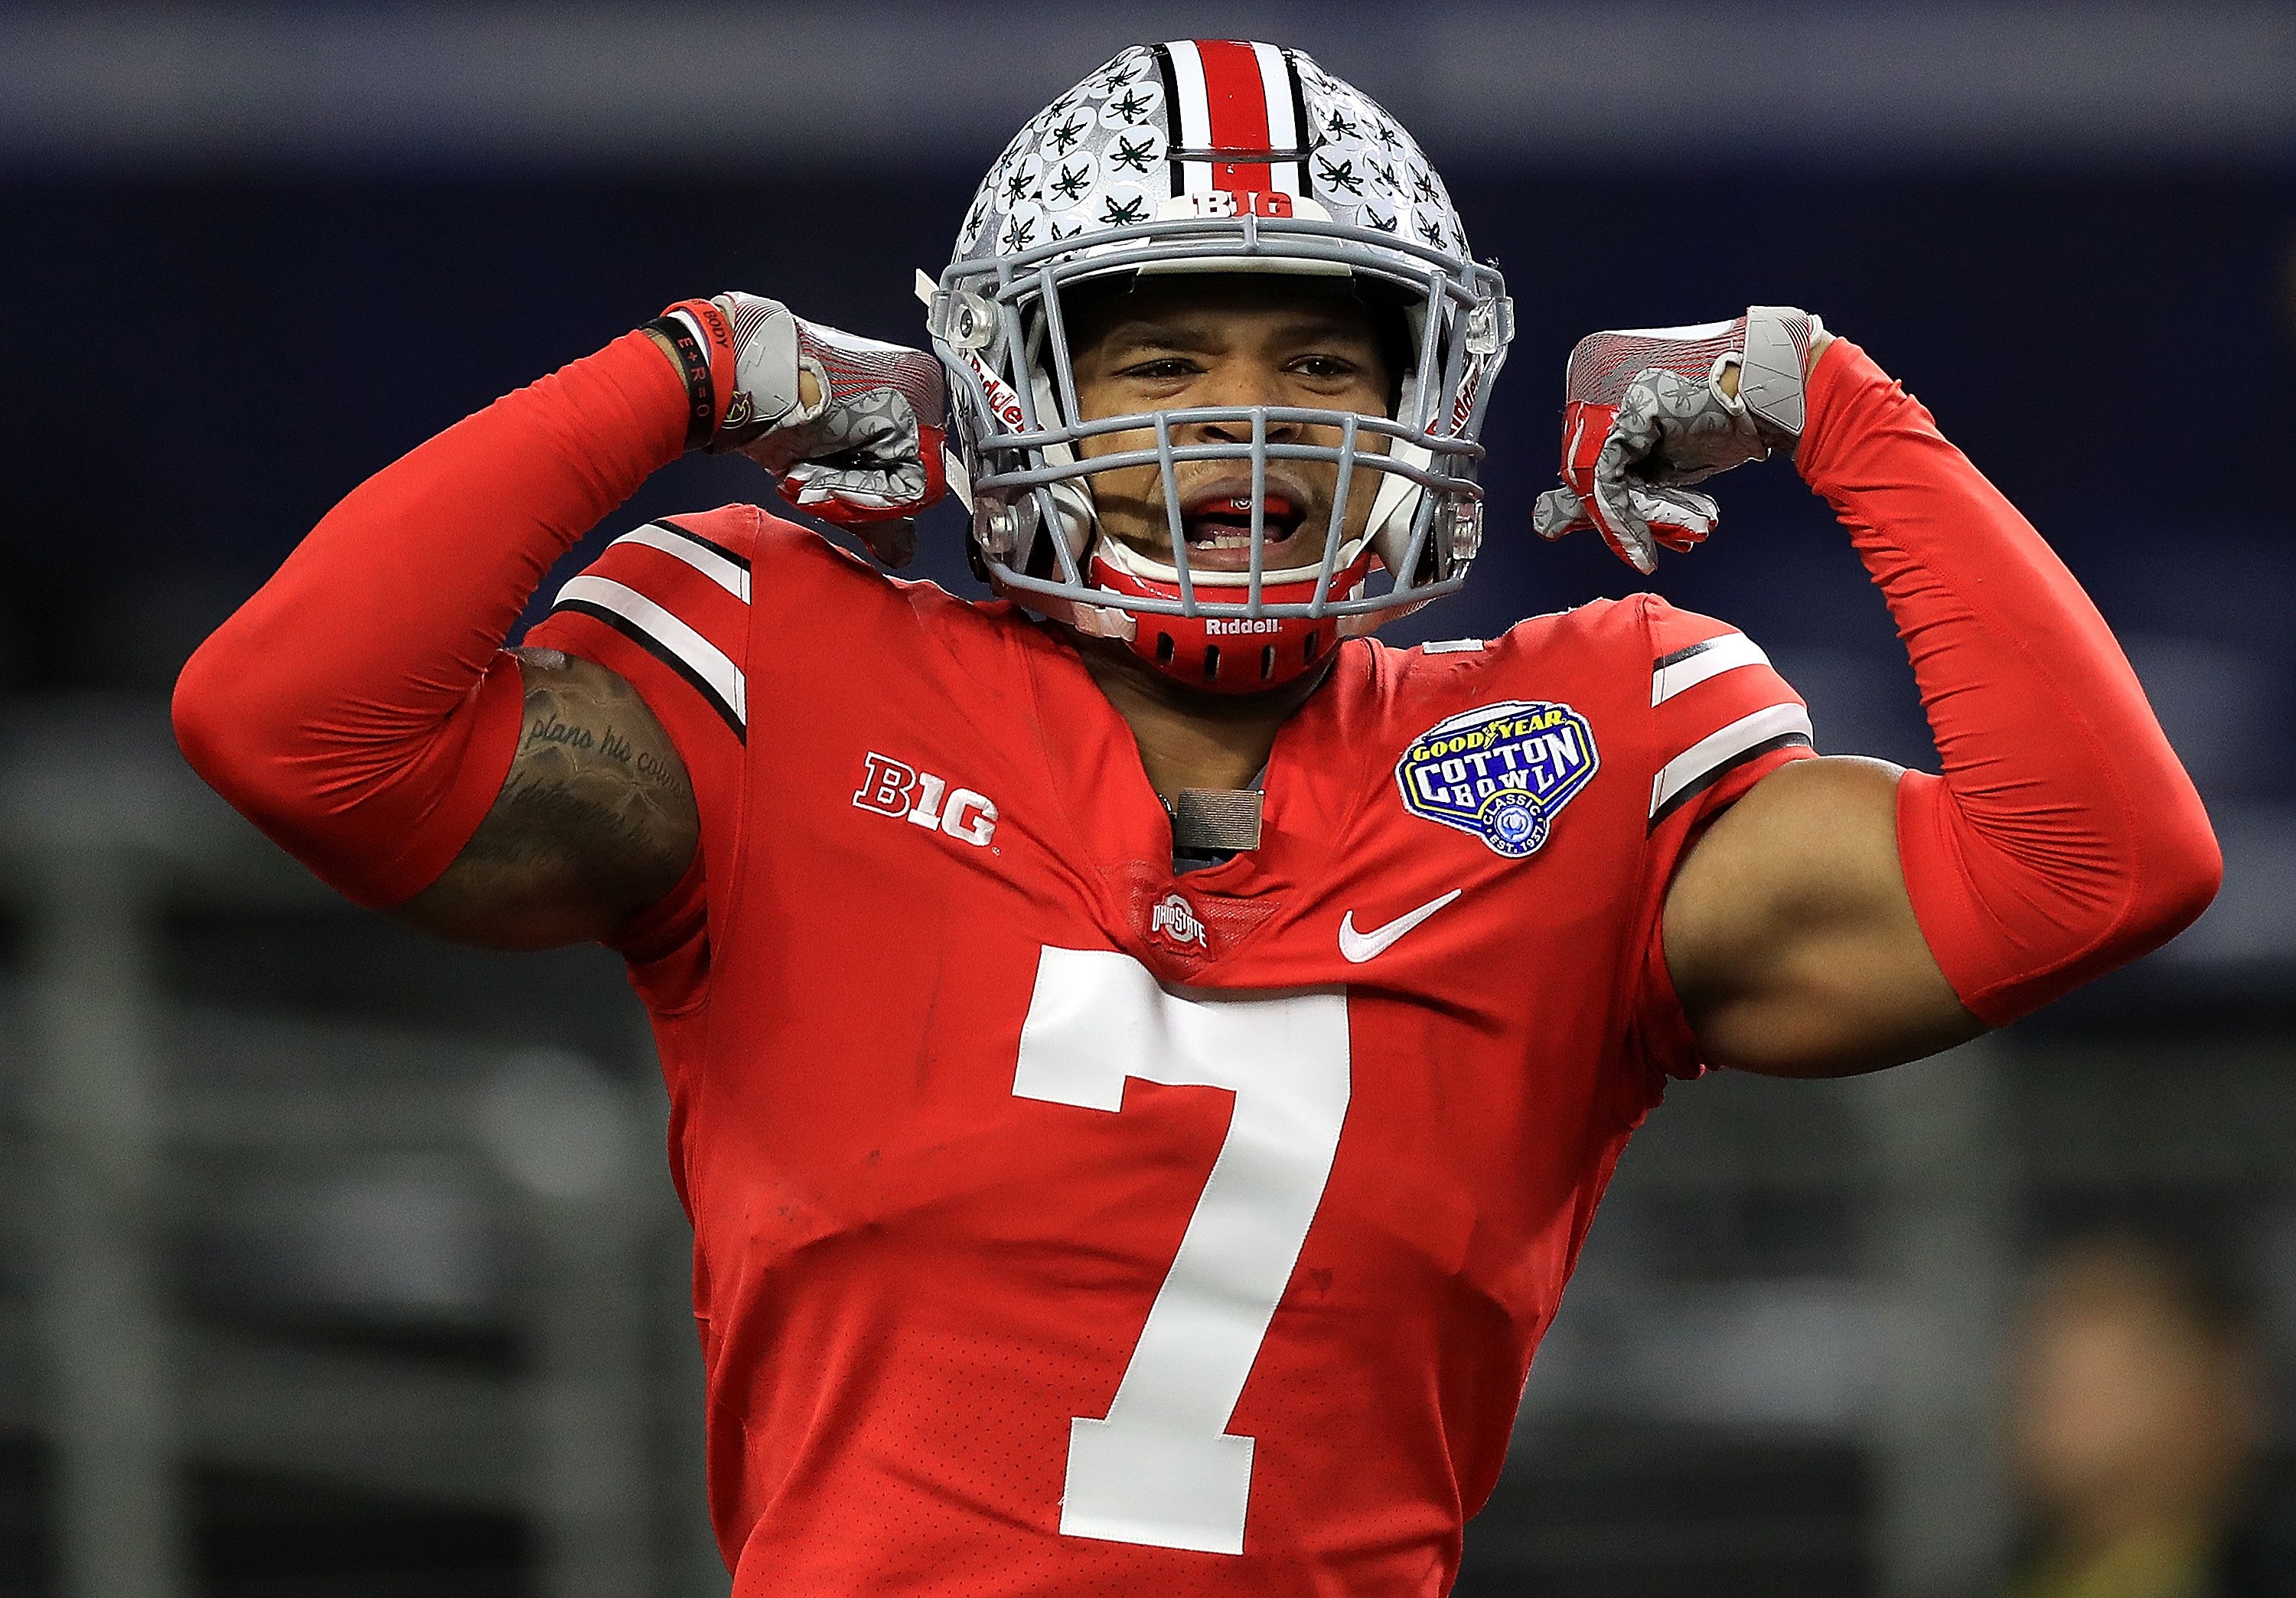 Buccaneers: Ohio State Buckeyes 2018 NFL Draft Prospects to Watch